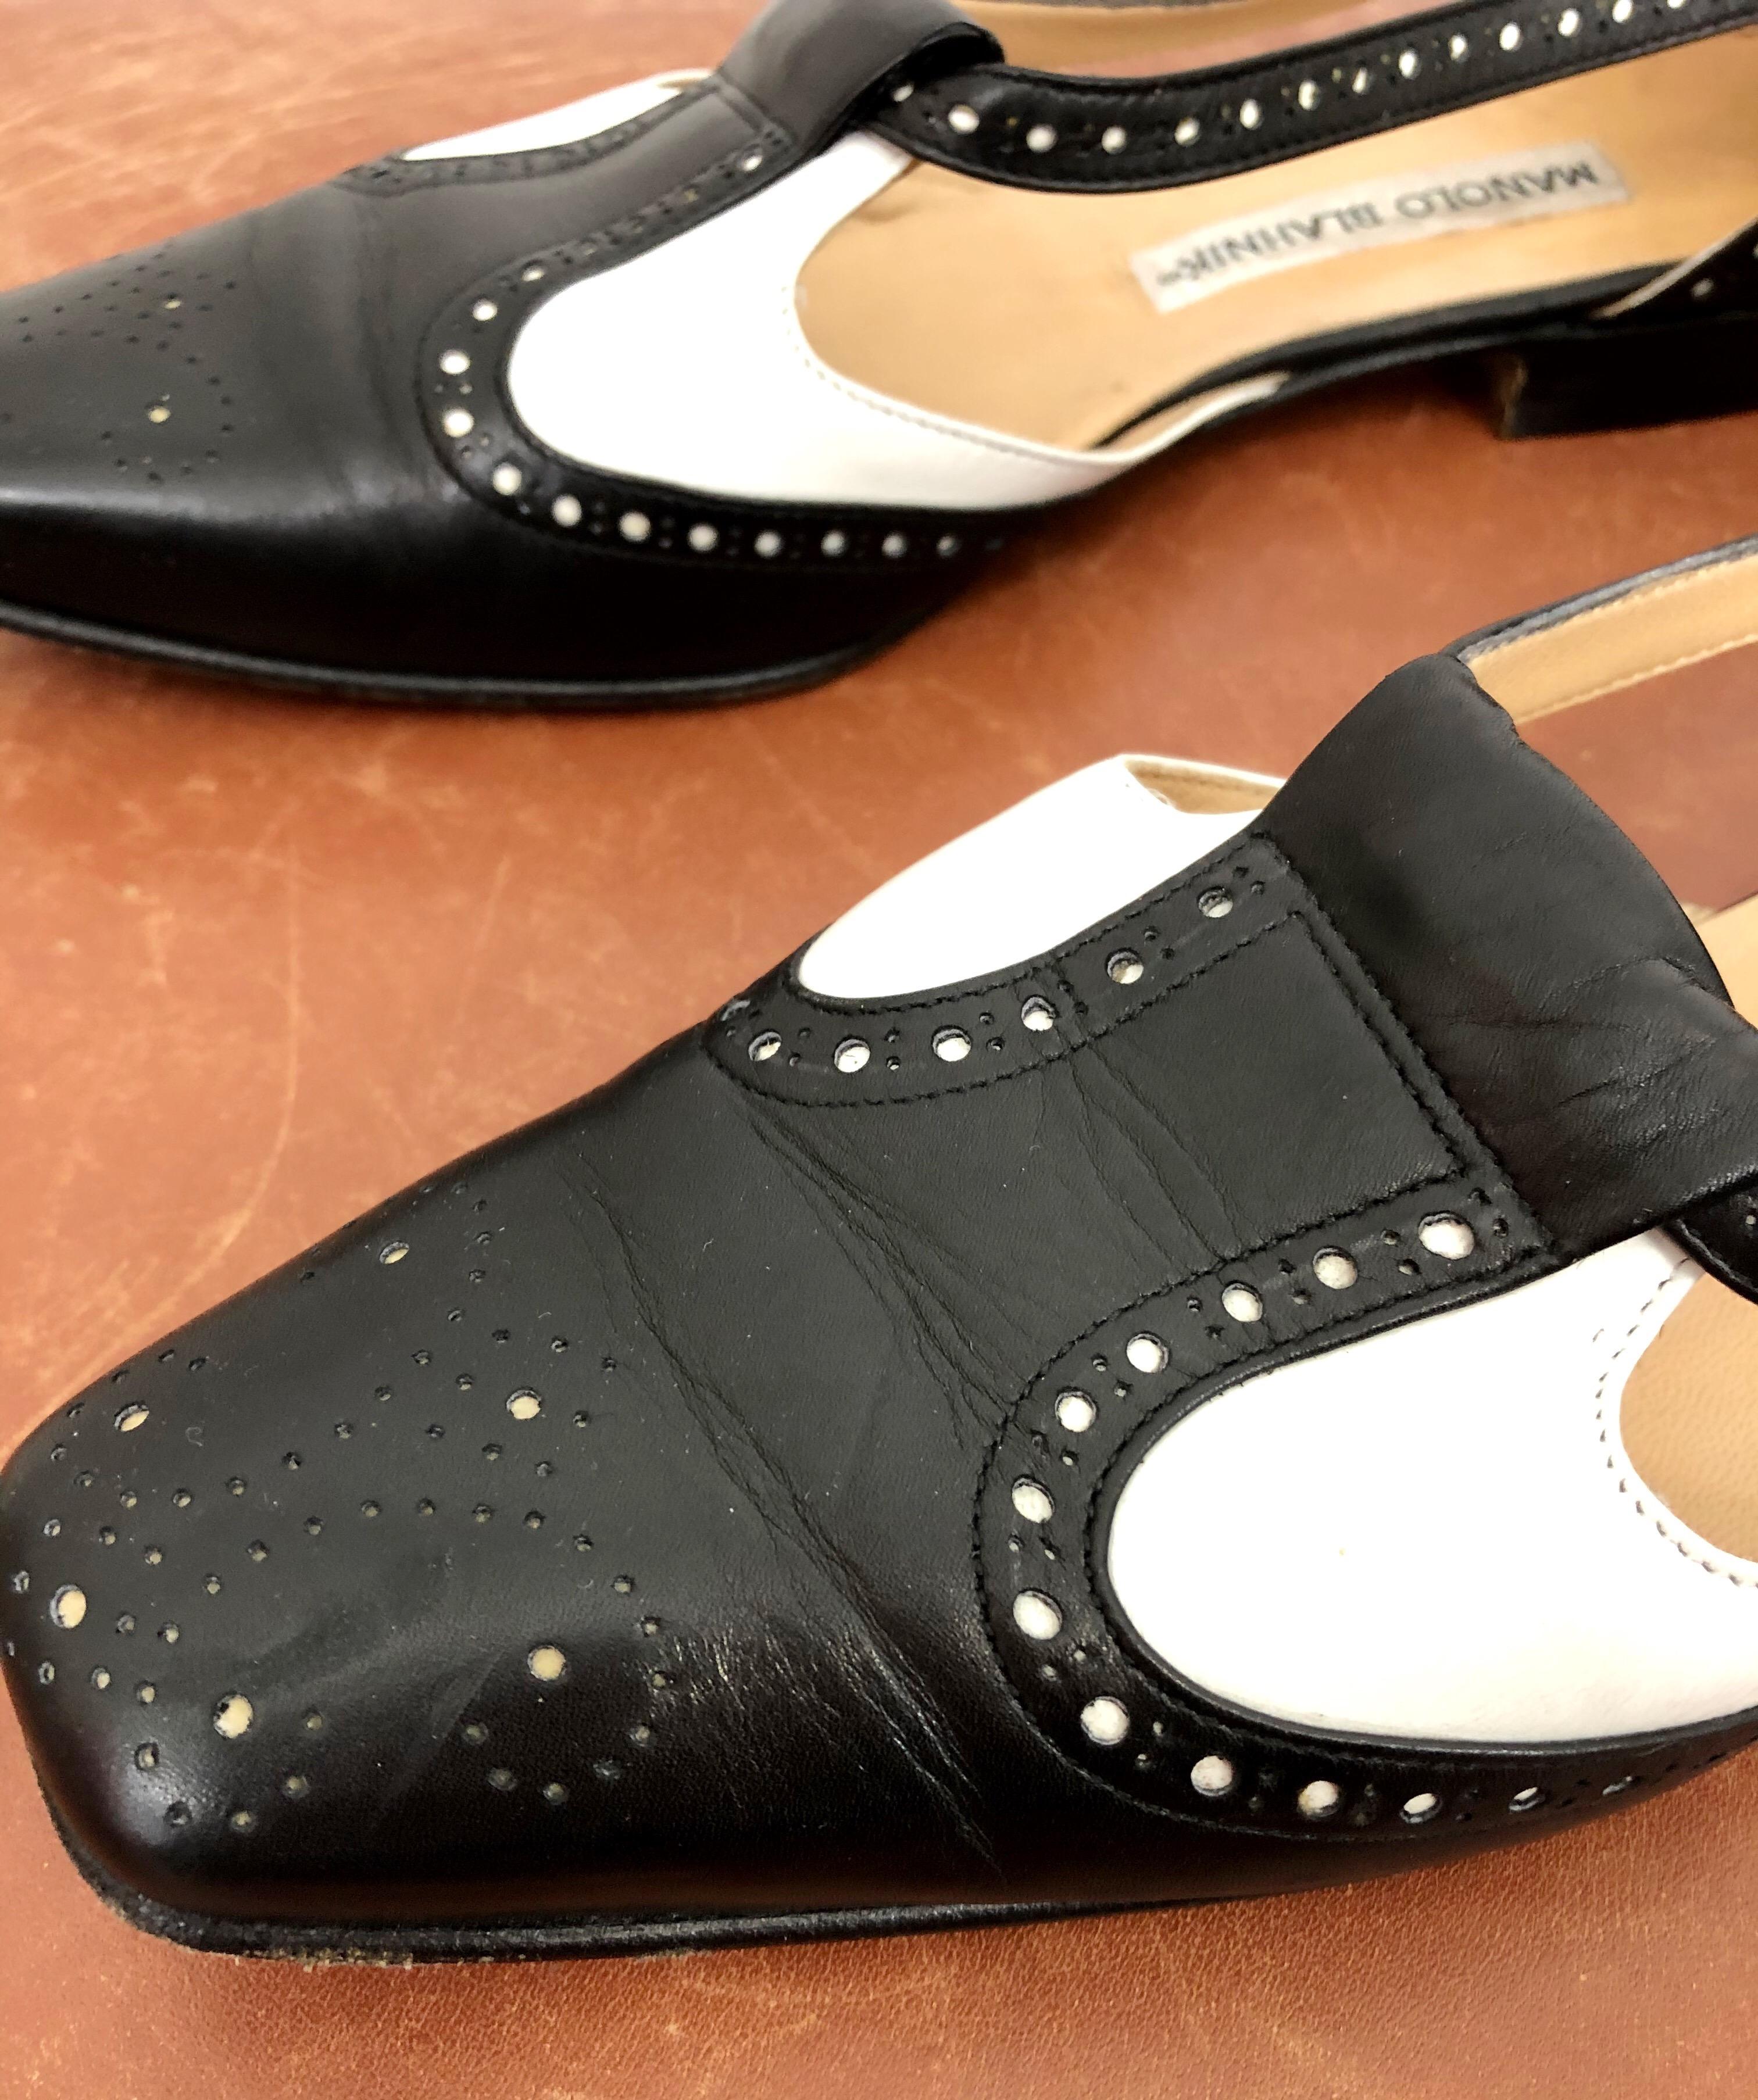 Chic vintage 1990s / 90s MANOLO BLAHNIK Size 38.5 / 8.5 black and white spectator cut-out leather flats! Rare early work by the shoe genius! Great with jeans, a skirt, trousers, shorts or a dress. In good condition
Made in Italy
Marked Size 38.5 /